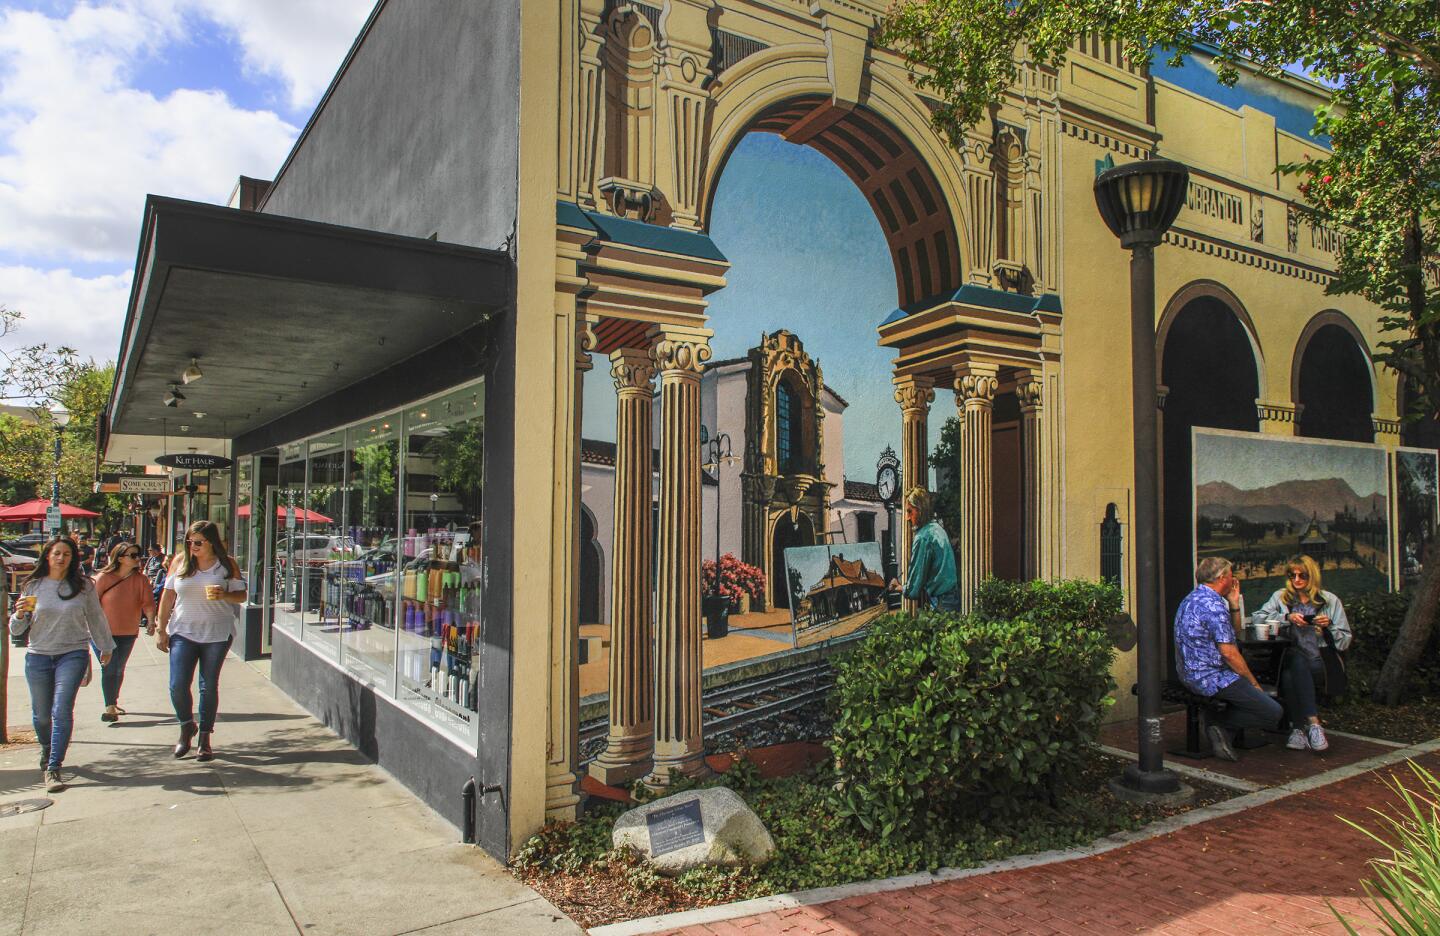 Artist Art Mortimer created a giant mural of historic street scenes in Claremont Village on the wall of the paseo at 123 Yale in the city of Claremont, 30 miles east of Los Angeles at the base of the San Gabriel Mountains. The unique collection of old, restored buildings house record stores, antique shops, cafes and a bakery.